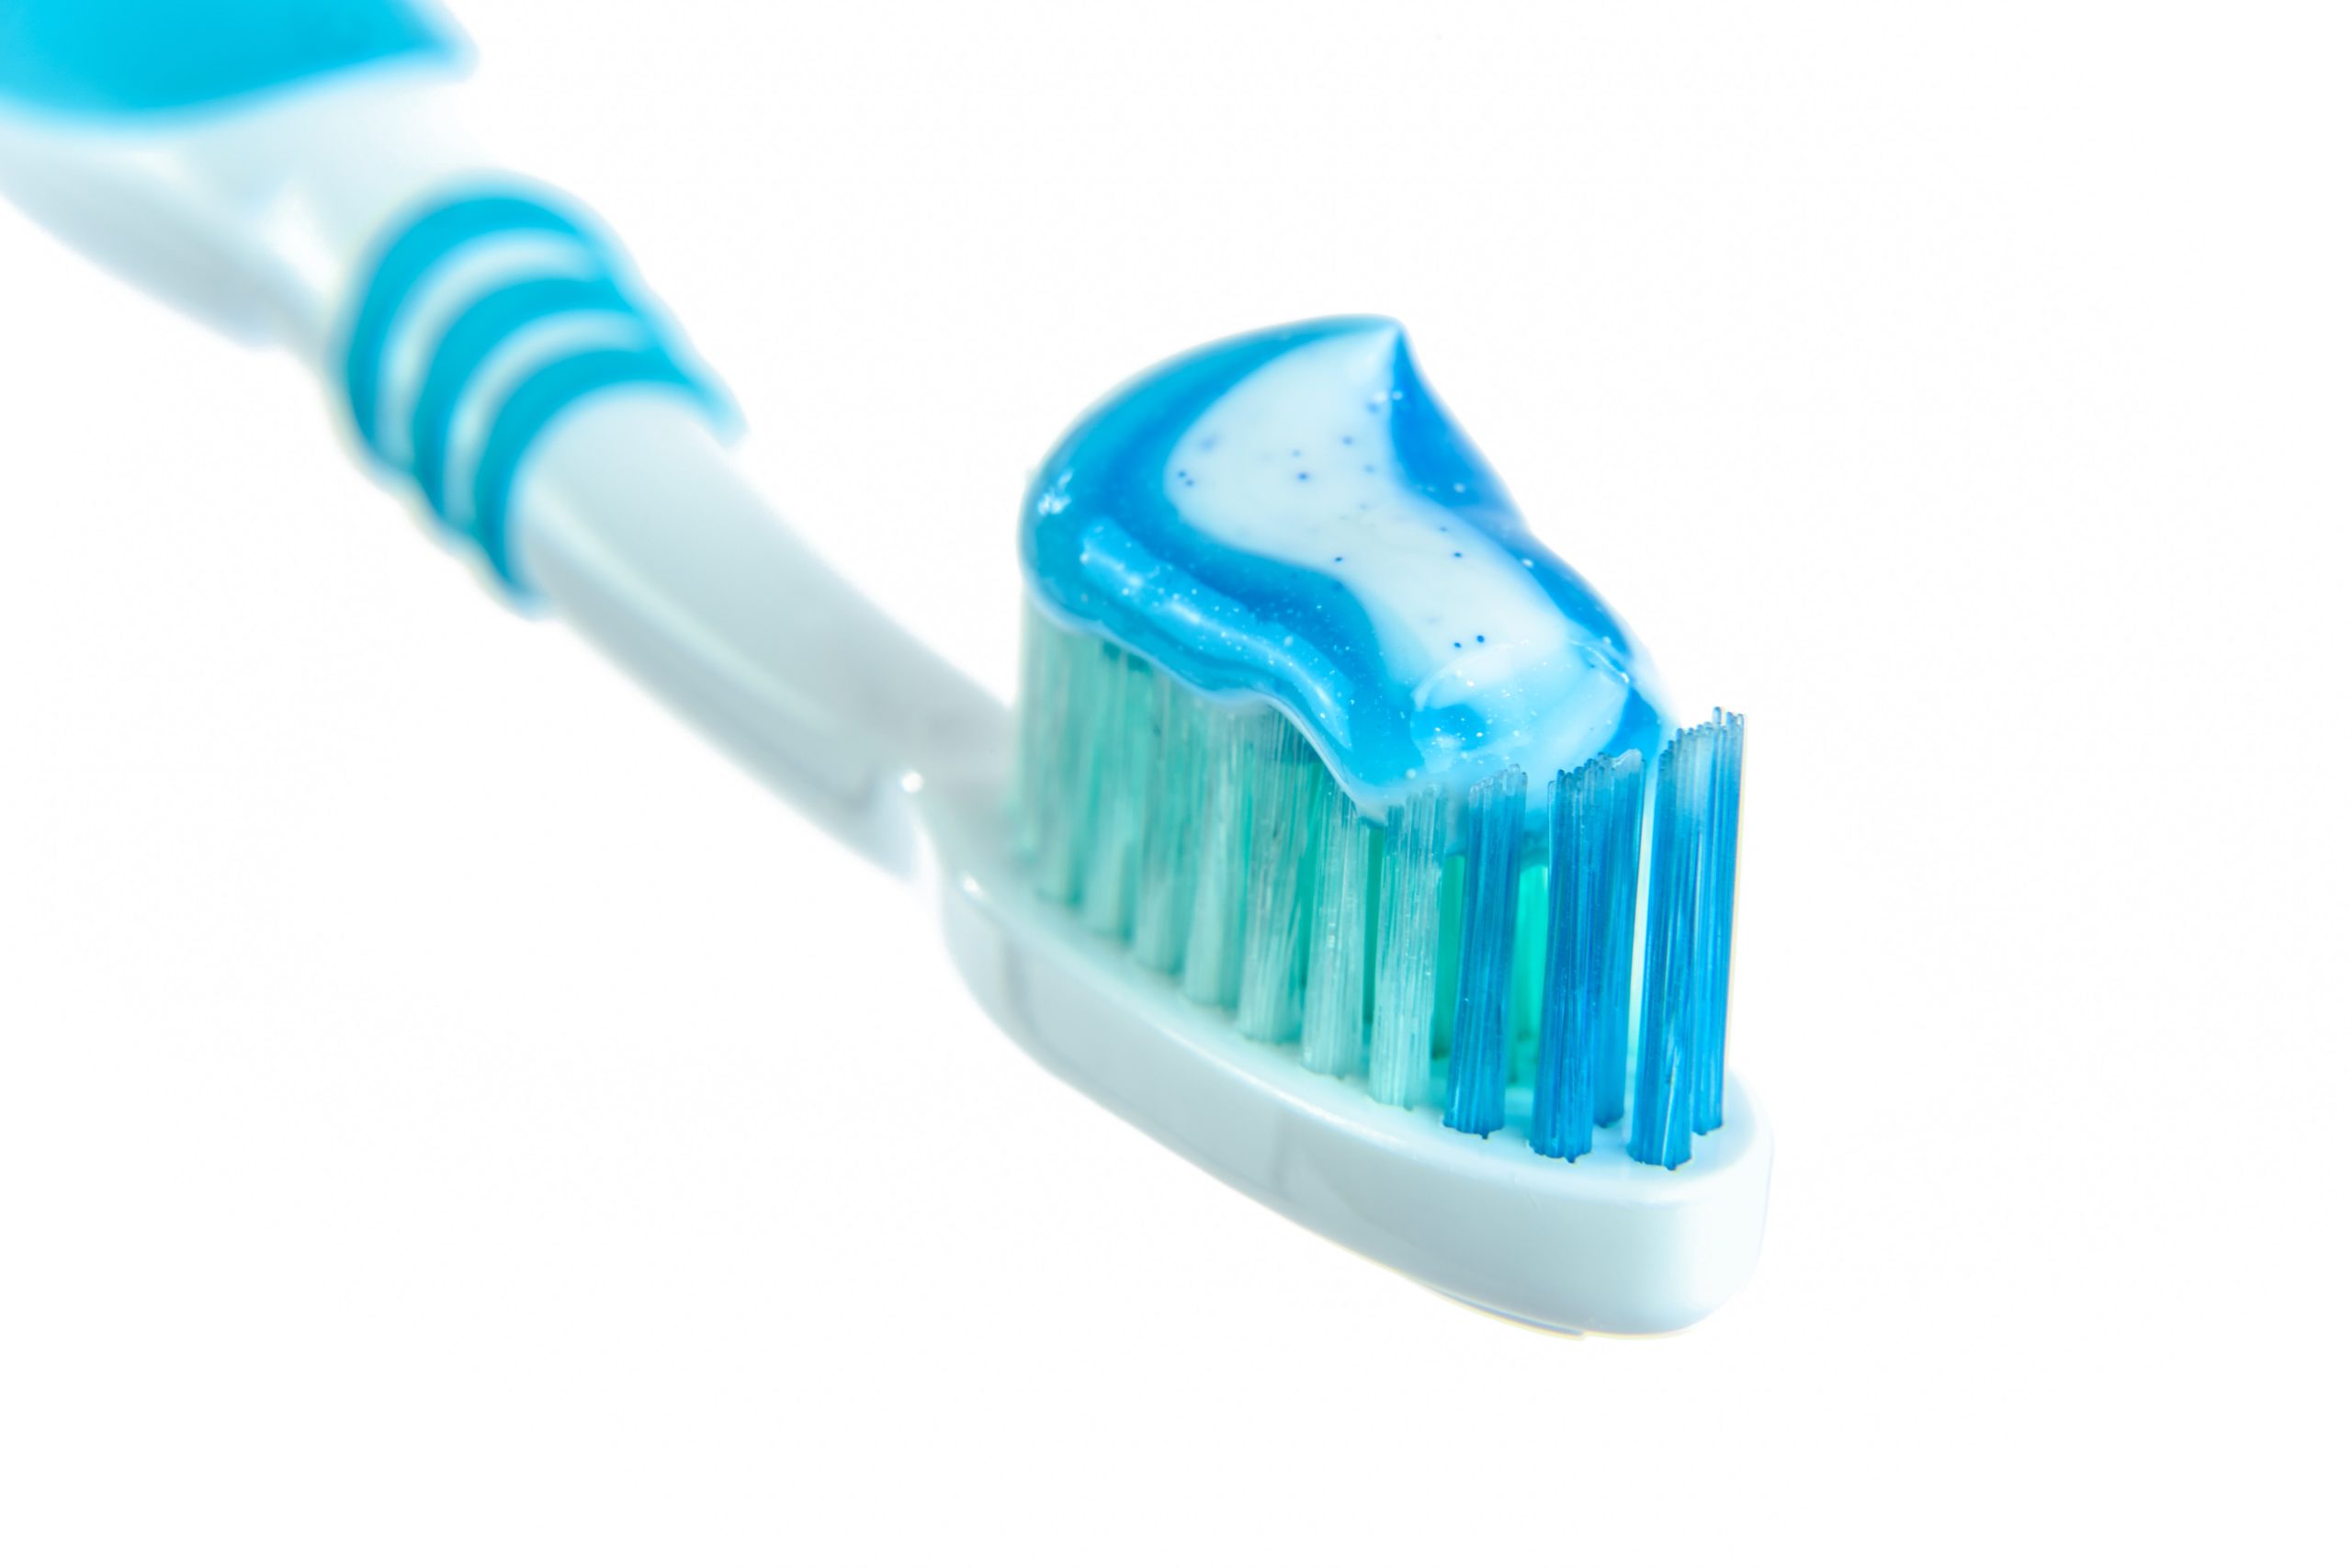 Toothbrush with toothpaste spread